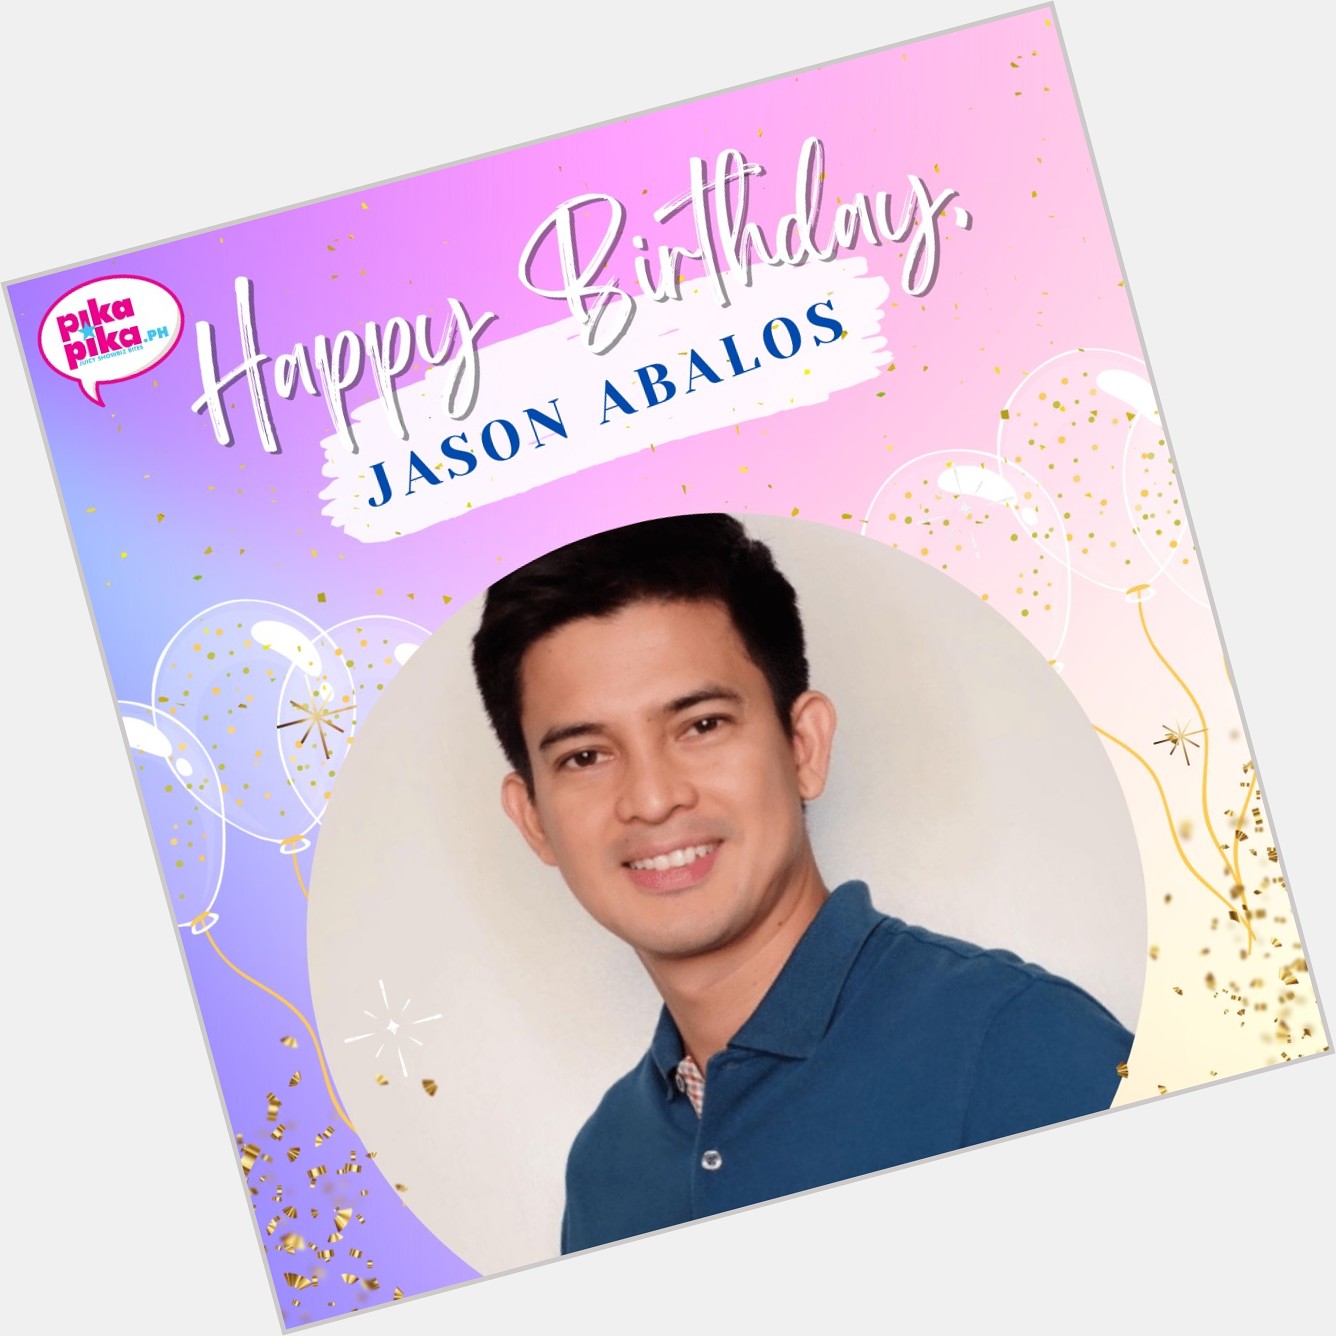 Happy birthday, Jason Abalos! May your special day be filled with love and cheers.    